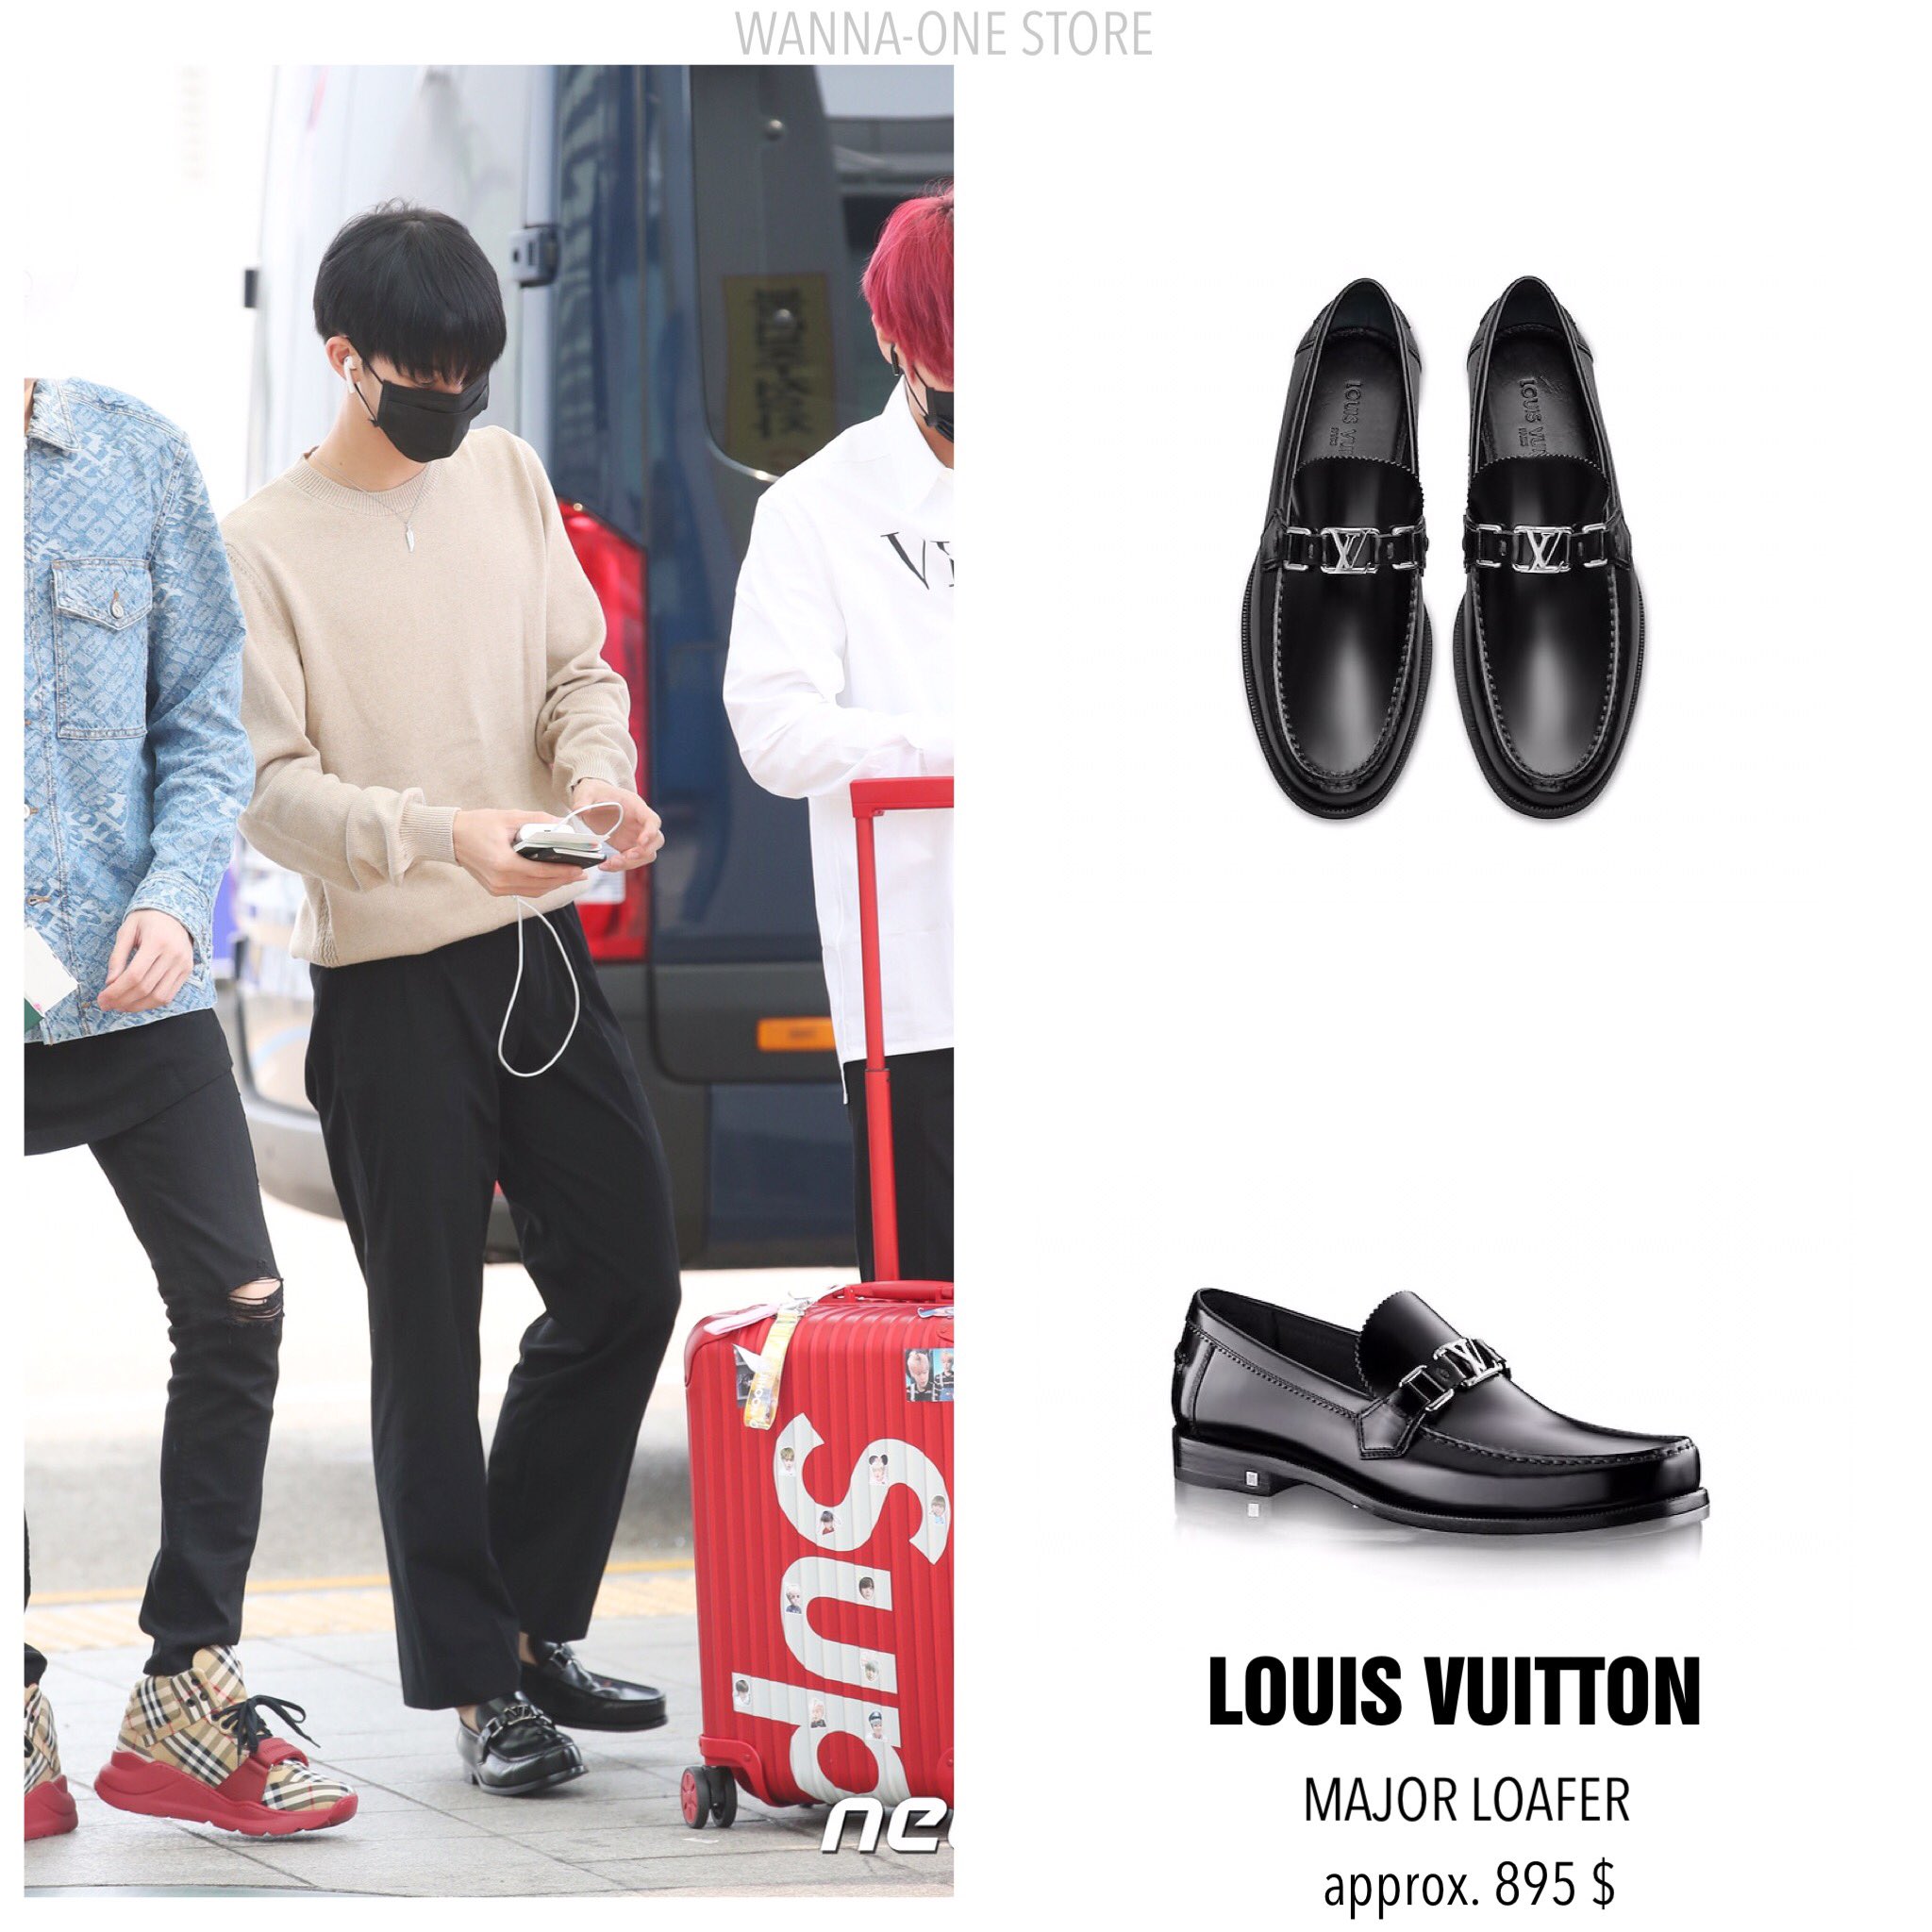 WANNA-ONE STORE on X: LOUIS VUITTON : MAJOR LOAFER approx. 895